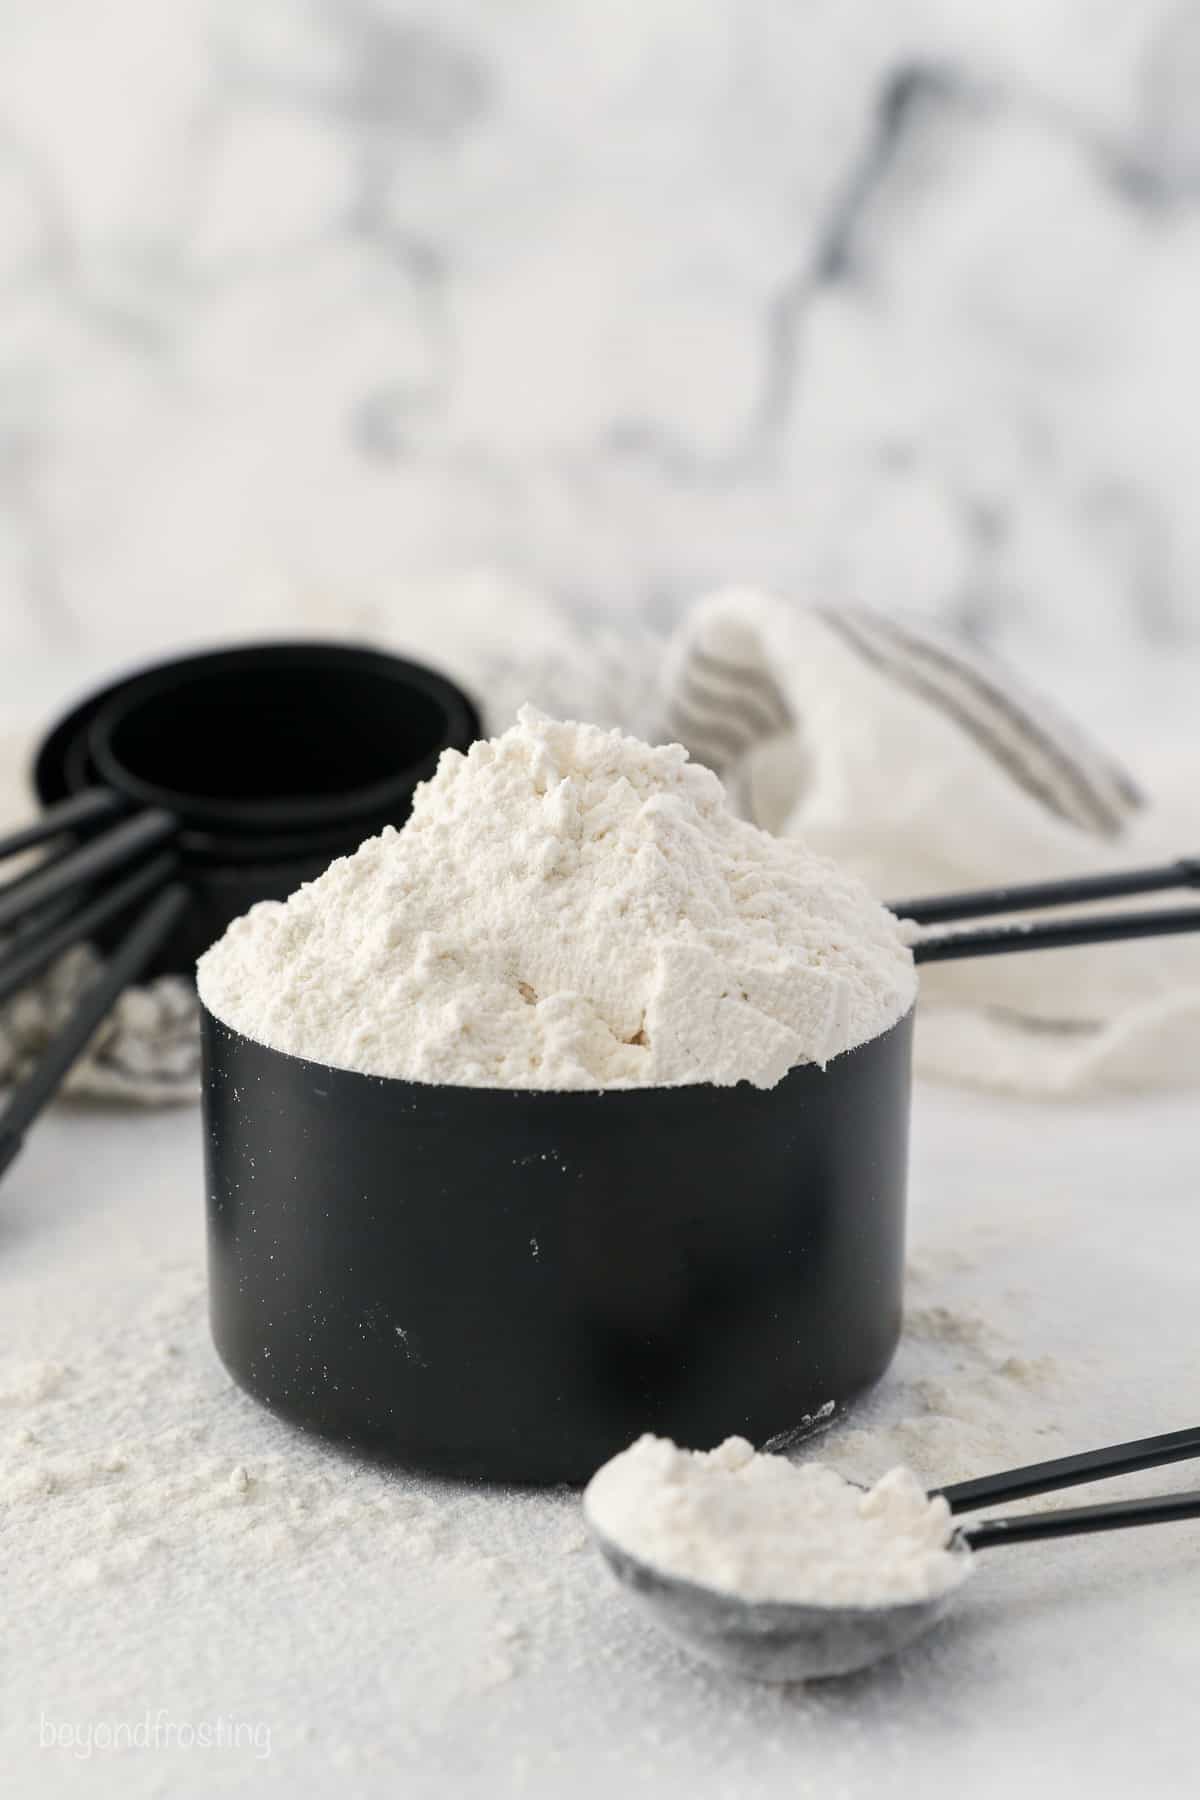 A heaping cup of flour in a black measuring cup